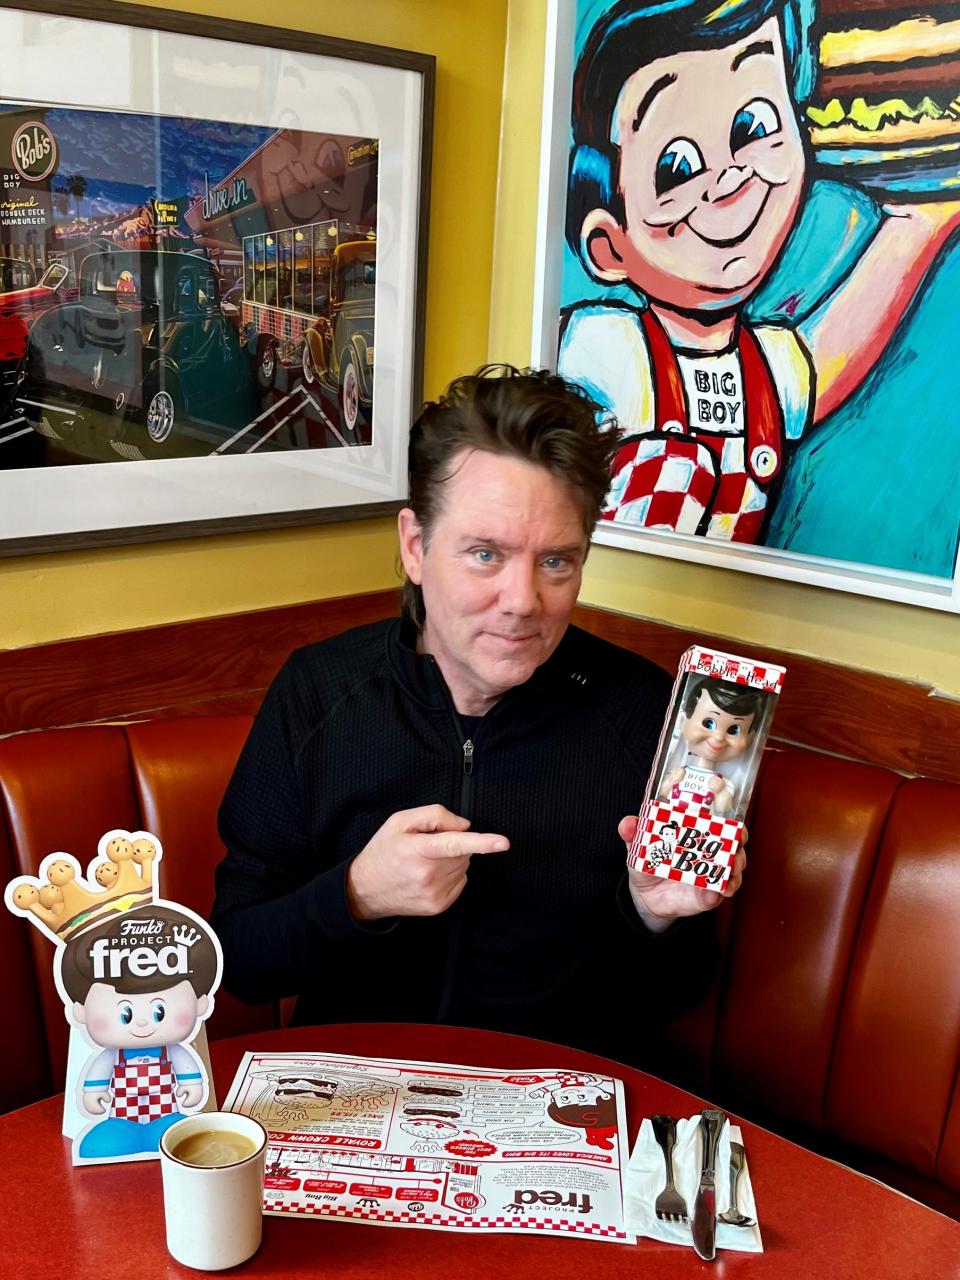 Funko founder Mike Becker with the company's first toy, a Wacky Wobbler figure of the Bob's Big Boy character. He was at the the historical Bob’s Big Boy restaurant in Burbank, Calif., for a launch event for Funko's Project Fred line of premium figures.